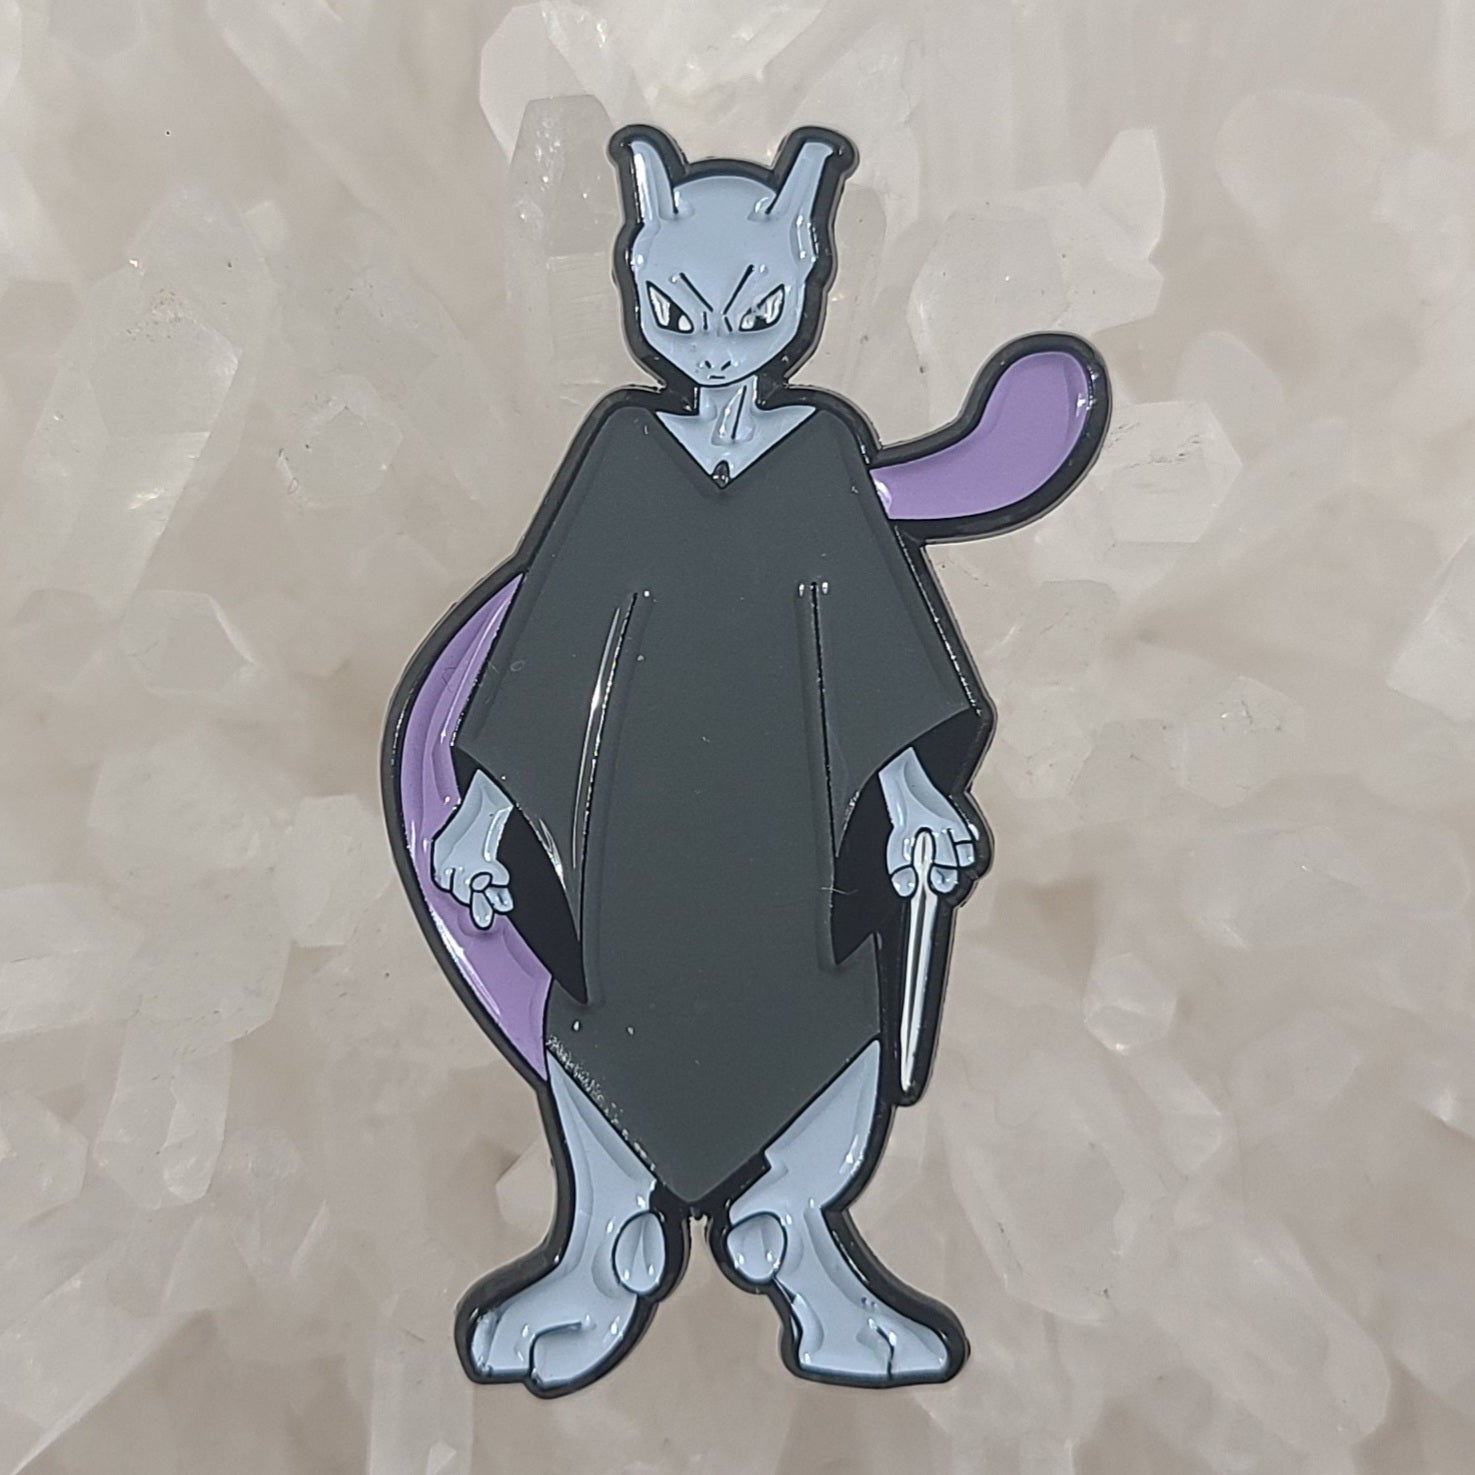 Harry Pottemon Potter Mew Two Lord Voldemort Mewtwo Mashup 90s Cartoon Video Games Enamel Pins Hat Pins Lapel Pin Brooch Badge Festival Pin